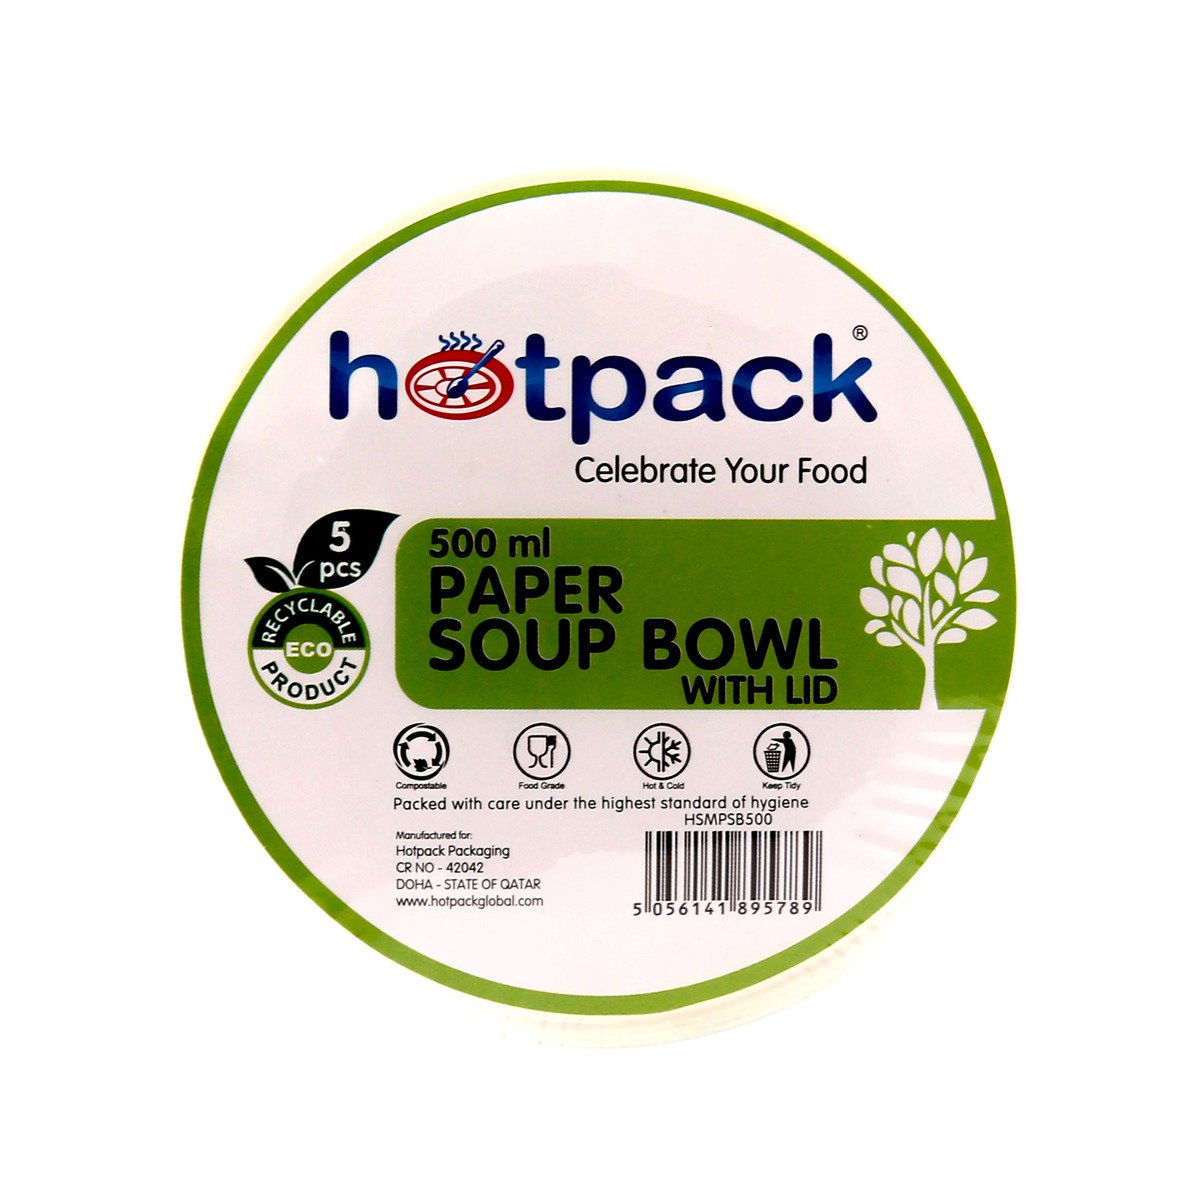 Hotpack Paper Soup Bowl with LID 500ml 5pcs